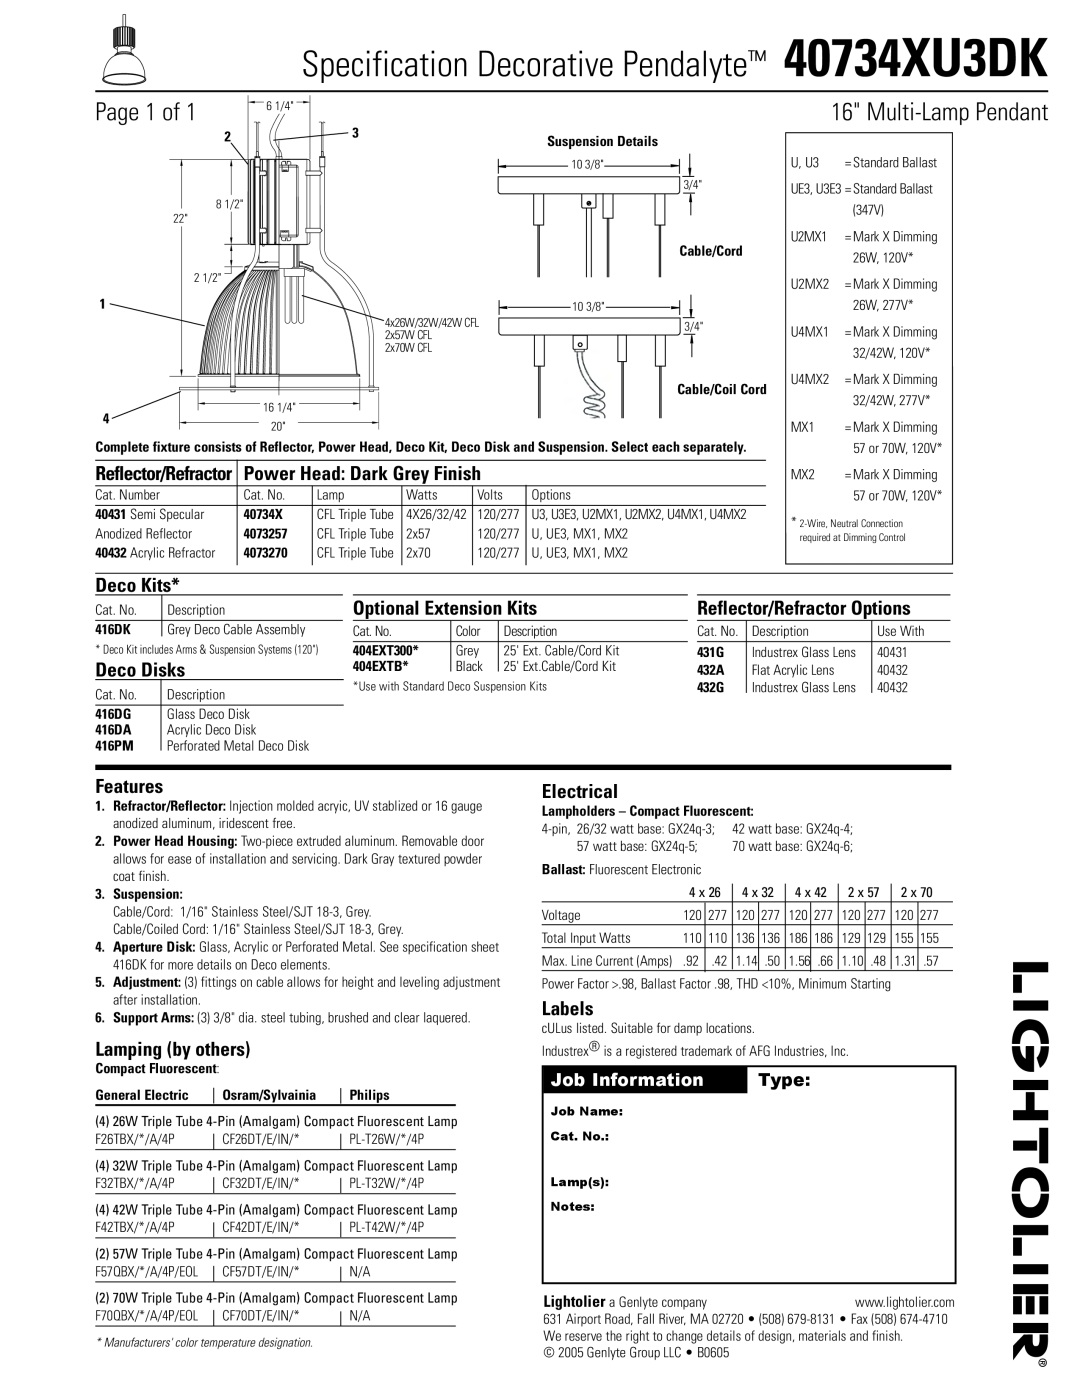 Lightolier specifications Specification Decorative Pendalyte 40734XU3DK, Page 1 of, Multi-LampPendant, Deco Kits, Type 